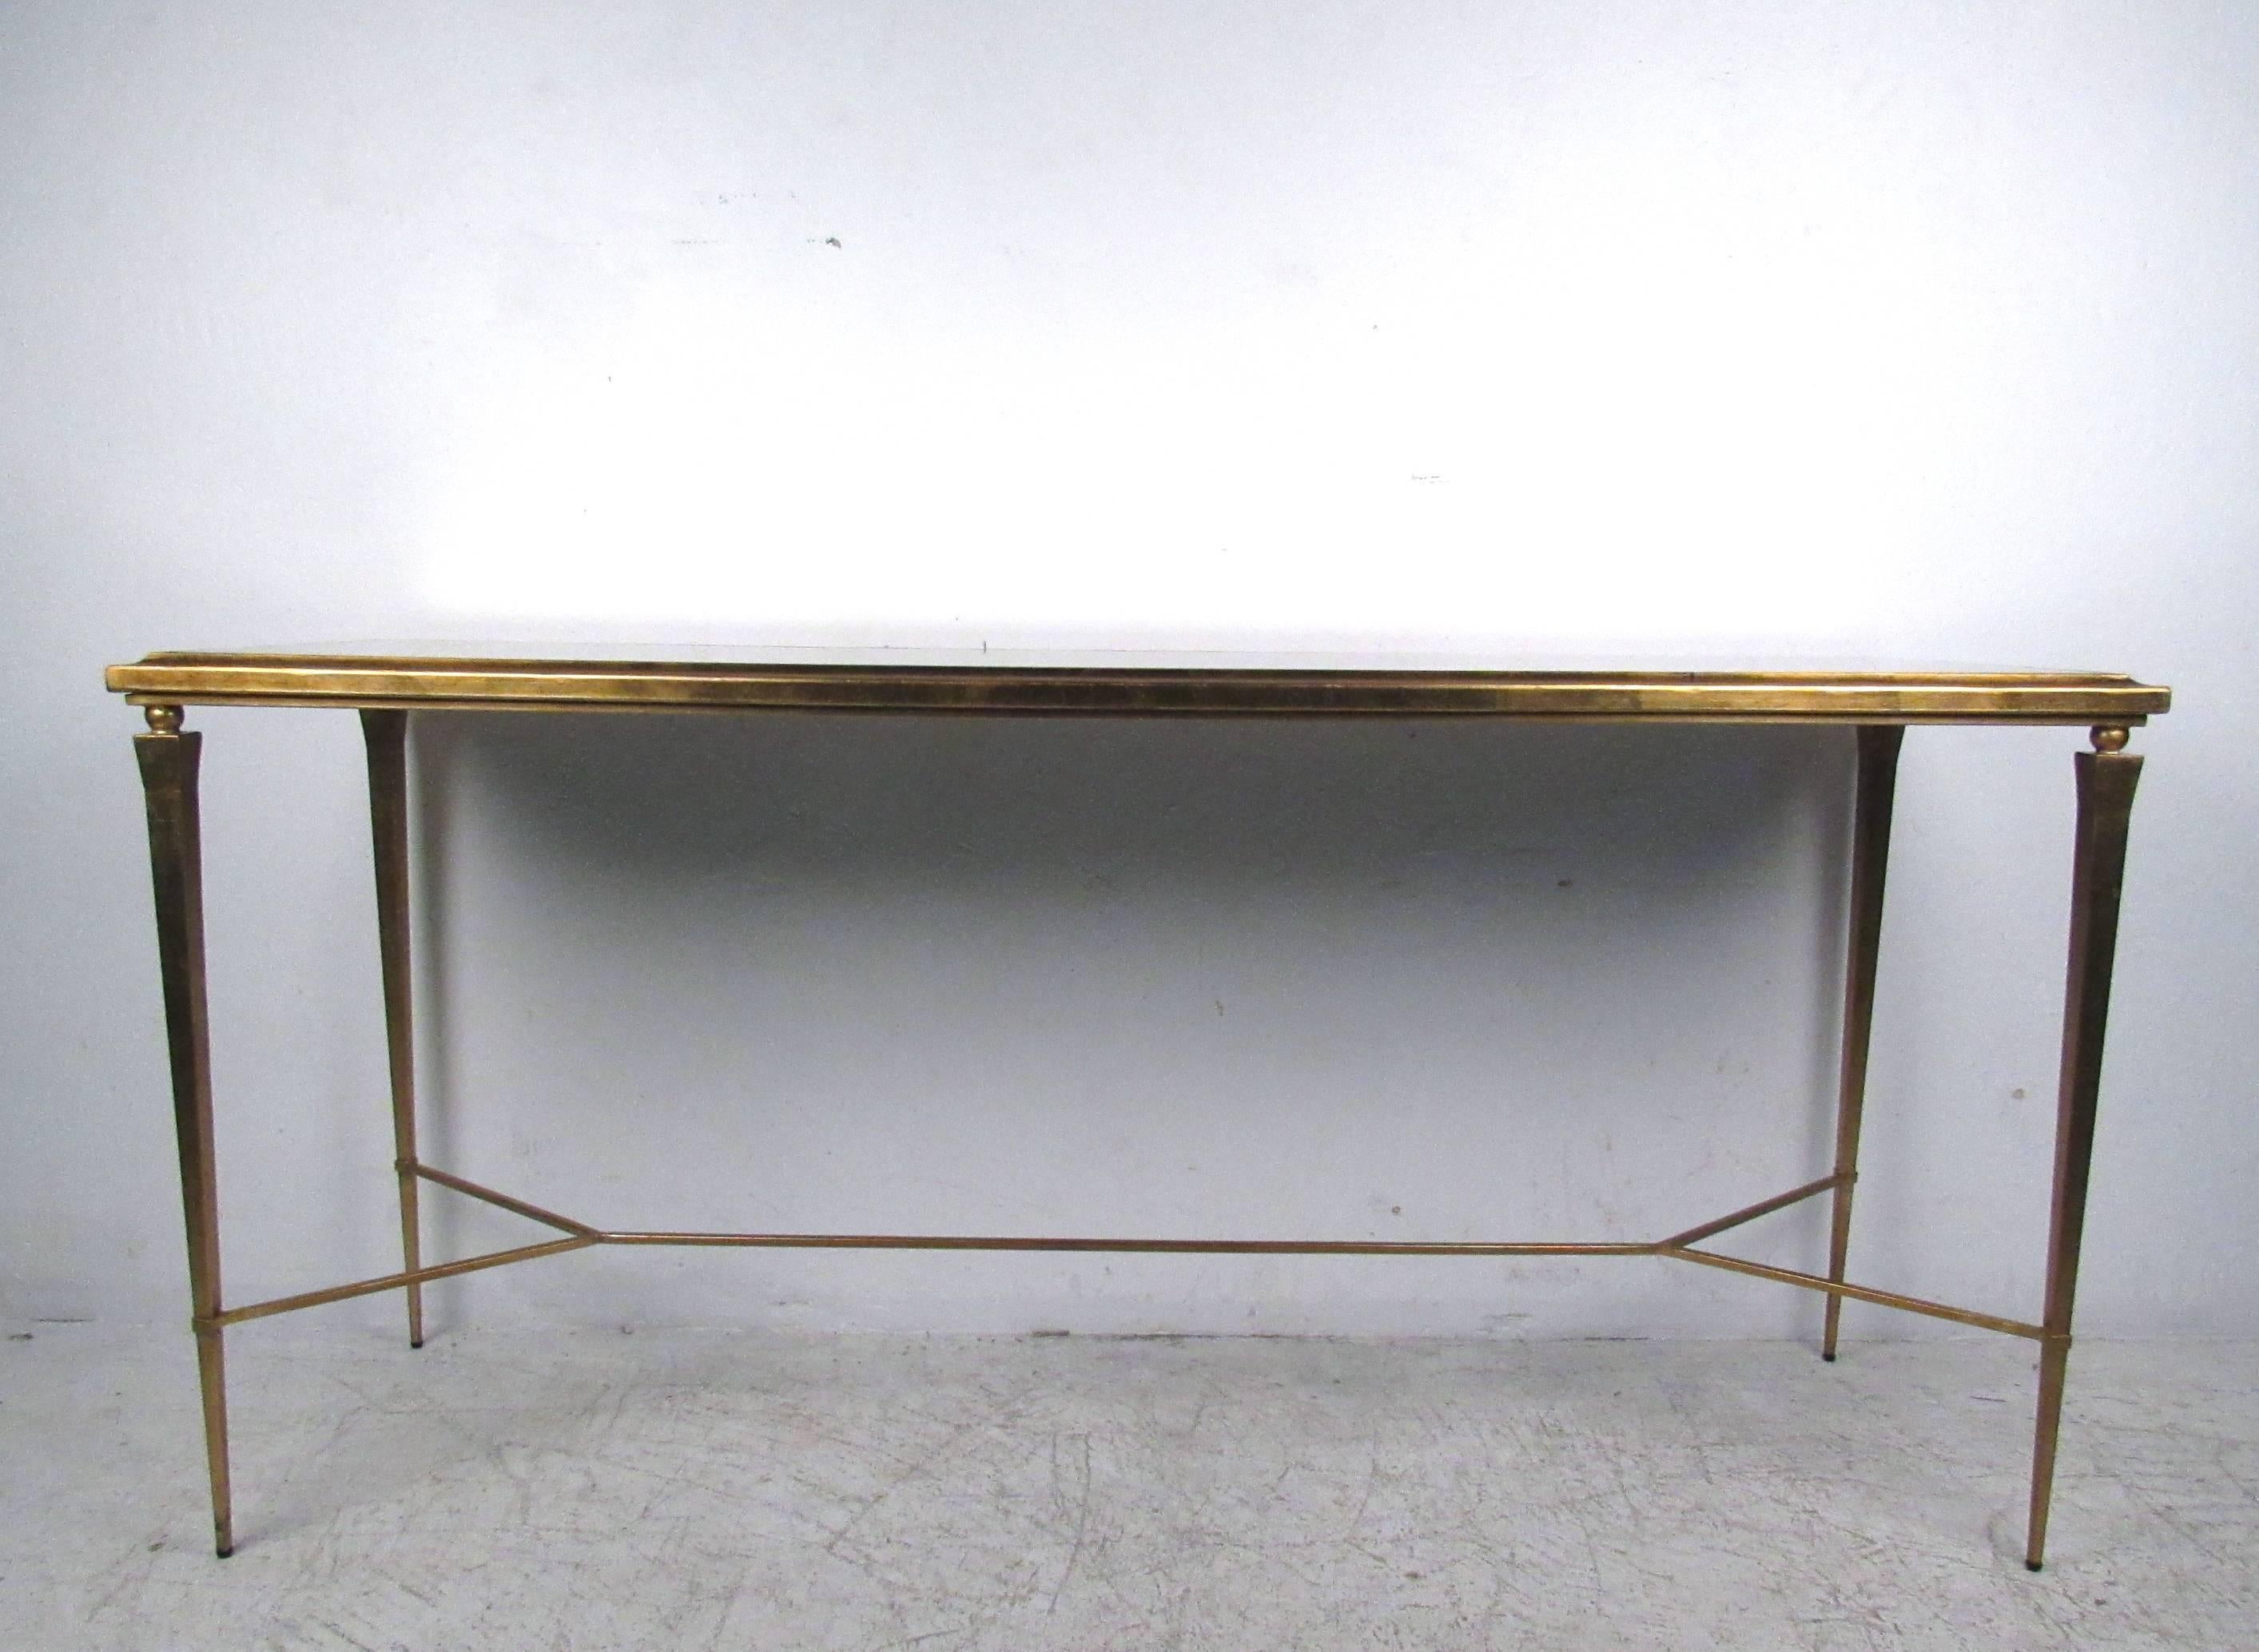 This beveled mirror console table features treated mirrored top with gold painted tapered leg frame. Stretcher adds stability to this elegant and impressive table, unique addition for a variety of interiors. Please confirm item location (NY or NJ.)